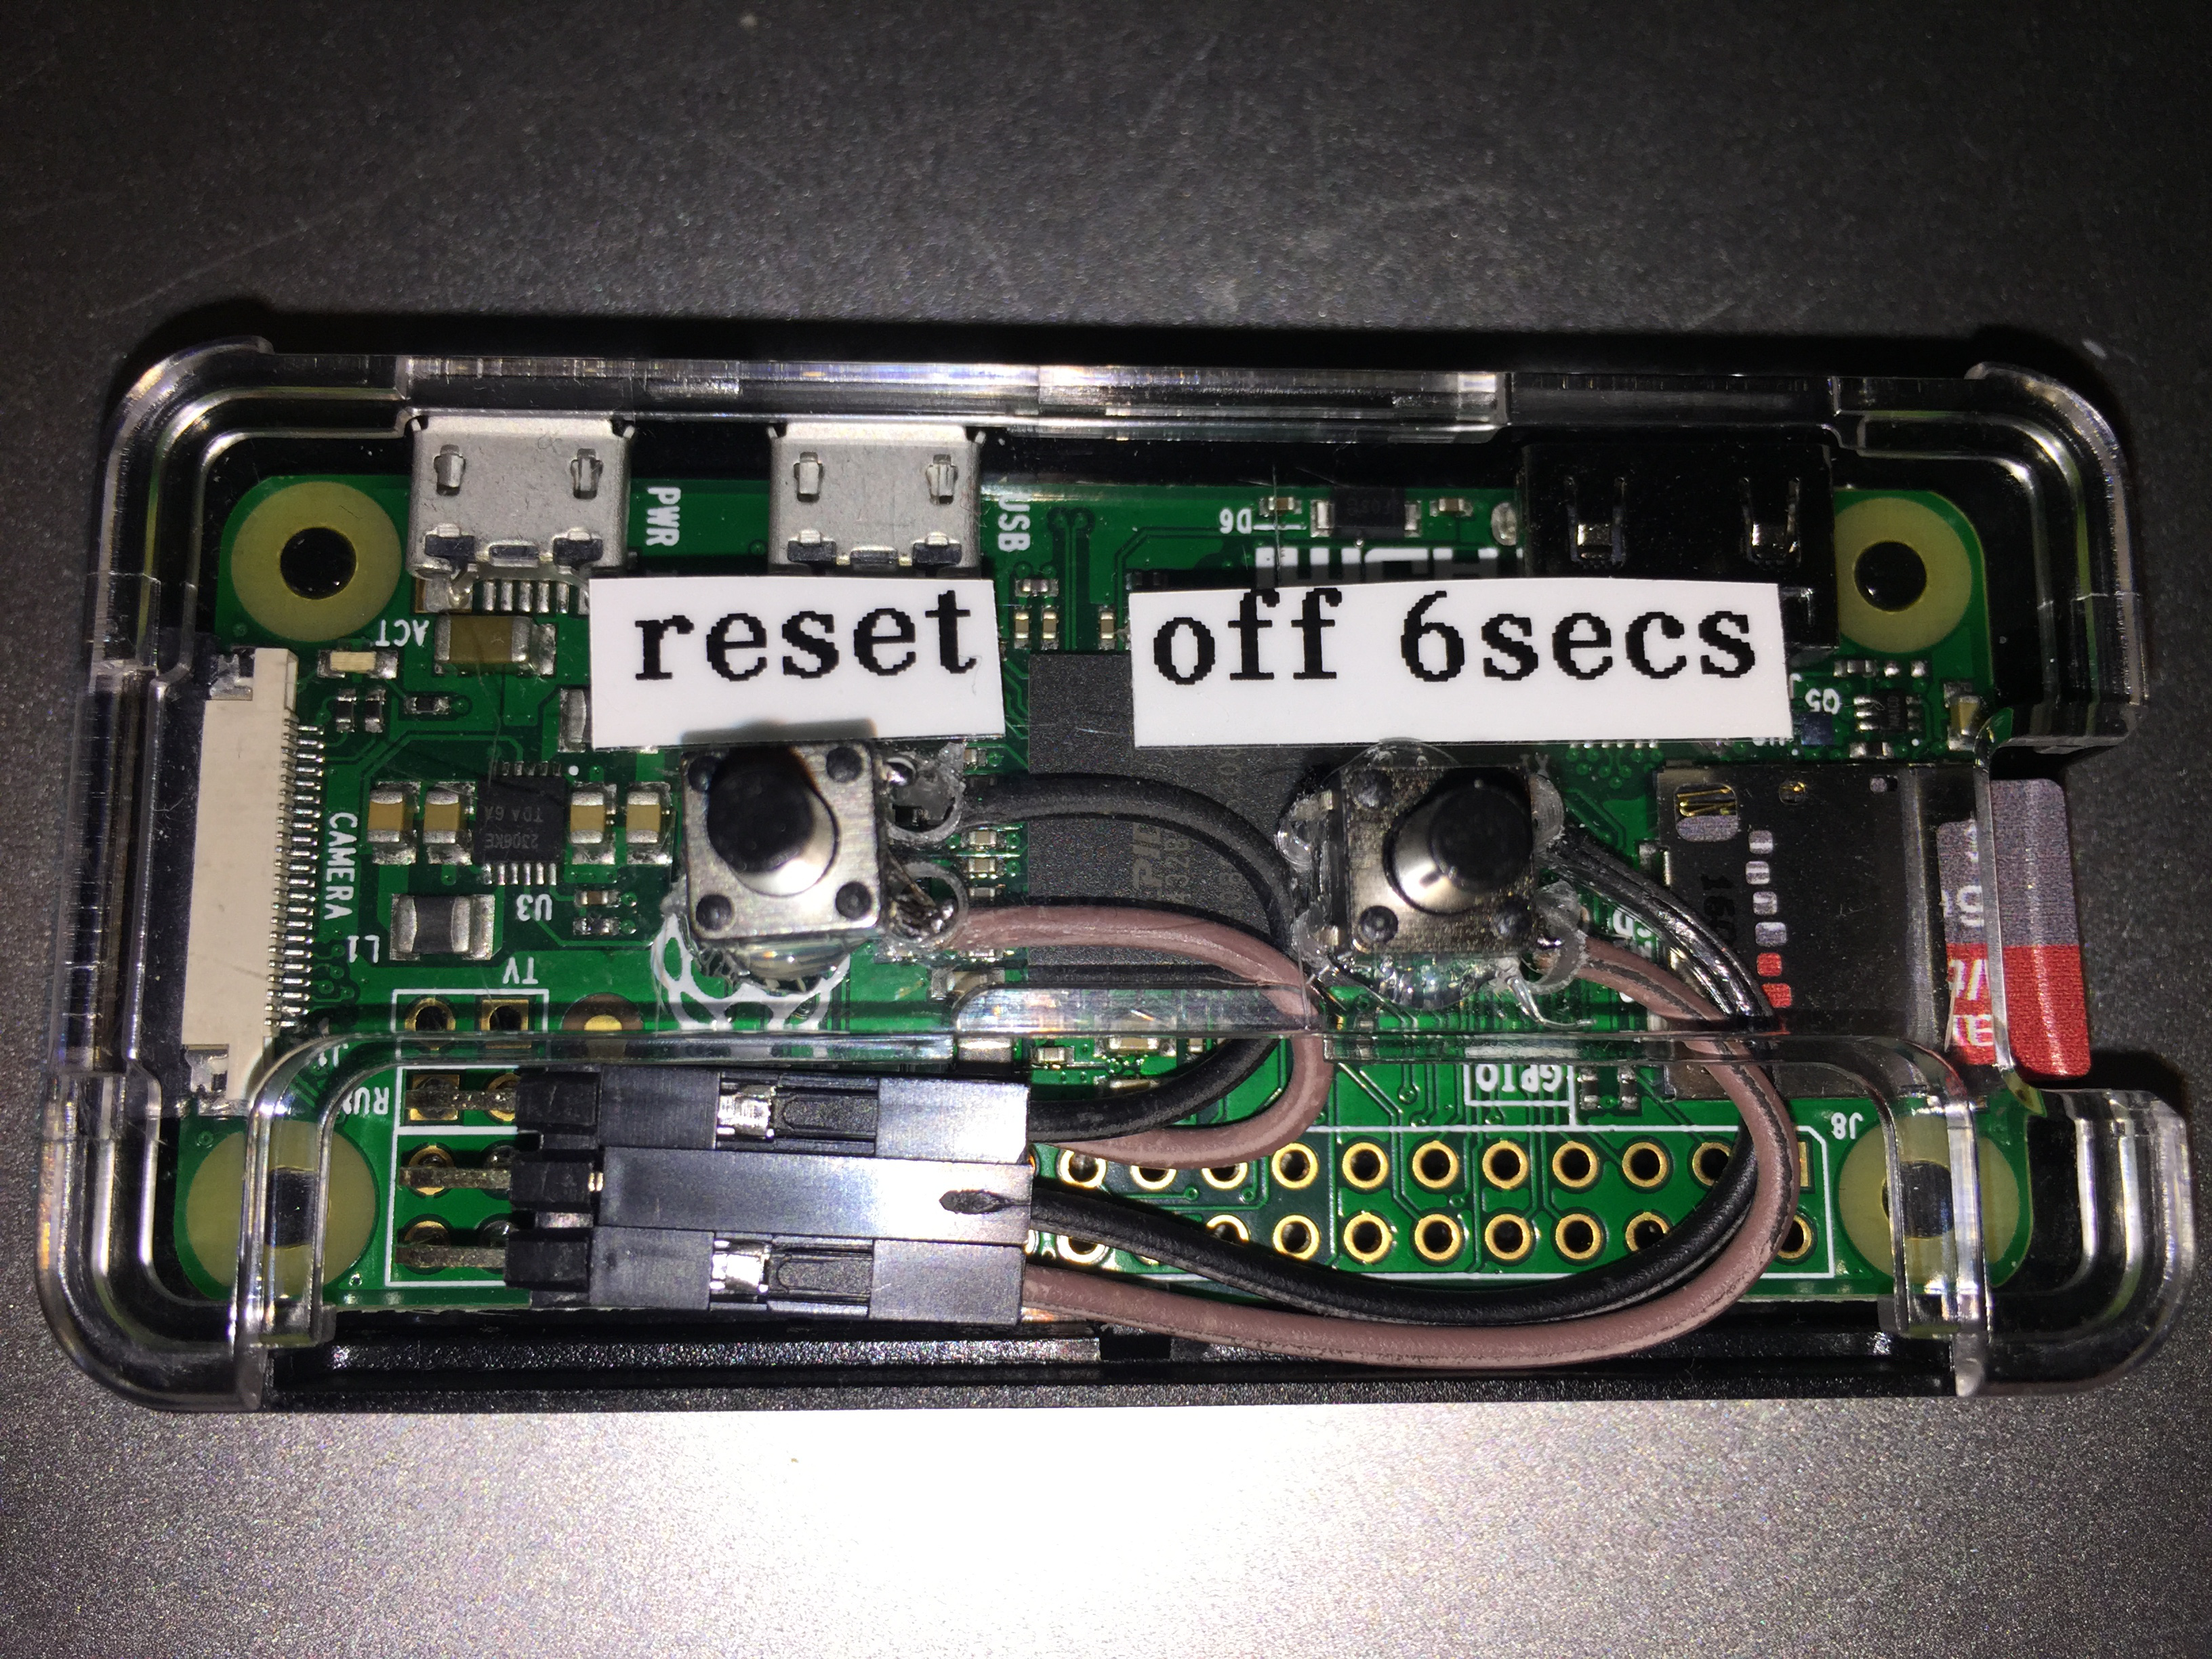 Example of Both an Off and Reset Switch on a Raspberry Pi Zero. Right angle headers are used for a compact connection. The switches are mounted directly onto an Adafruit case.